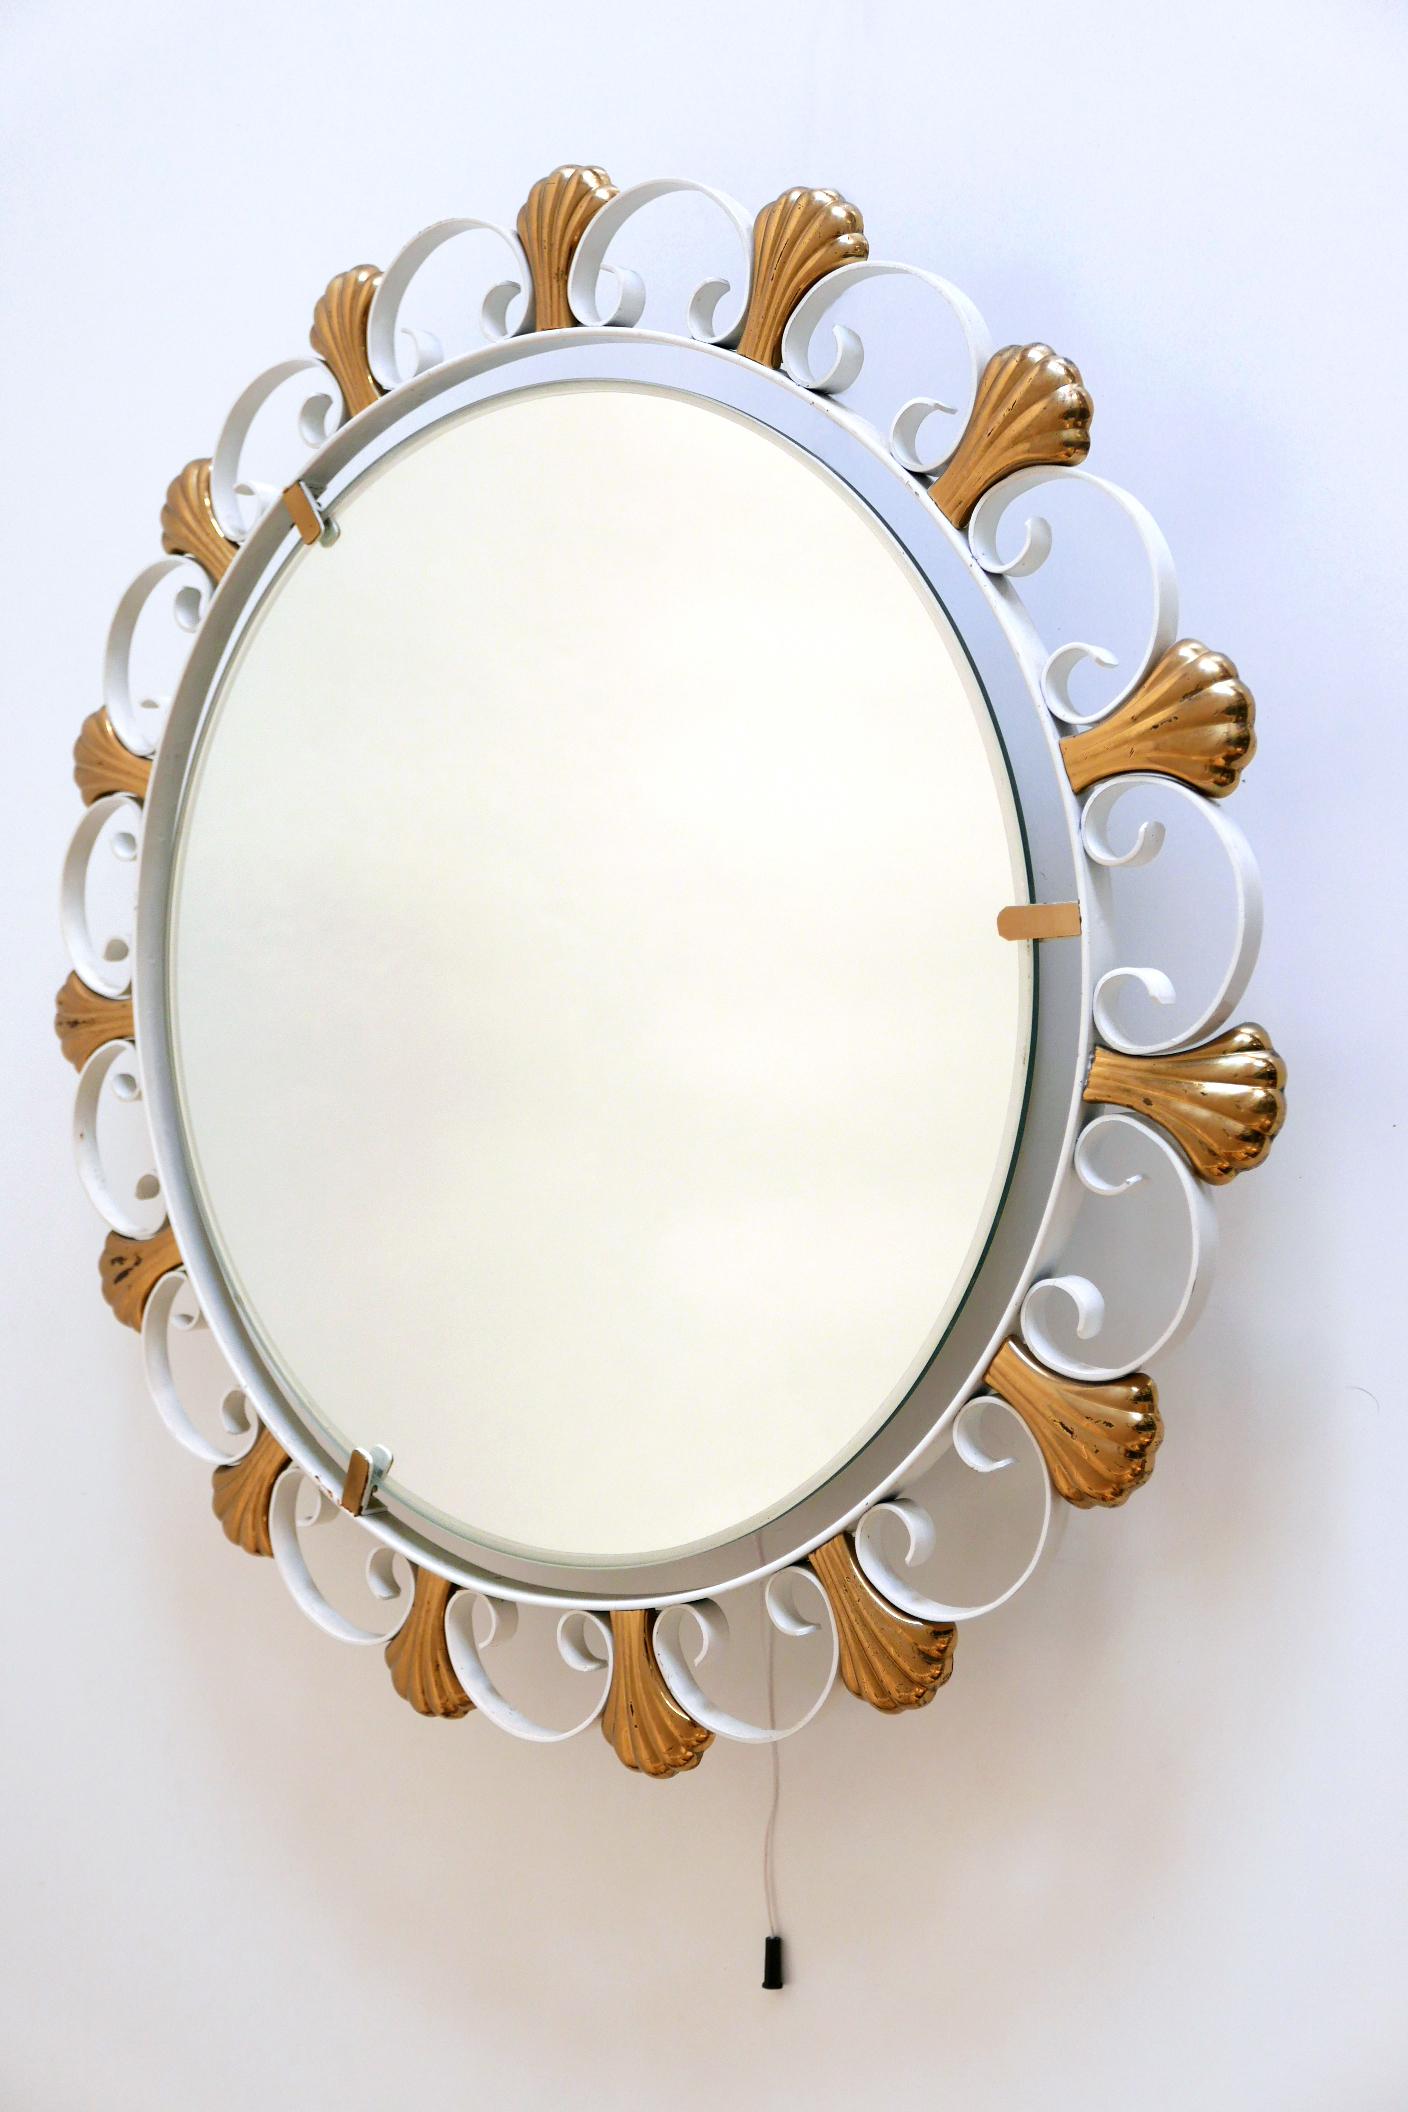 Elegant Mid-Century Modern Backlit Wall Mirror by Hillebrand, 1960s, Germany For Sale 1